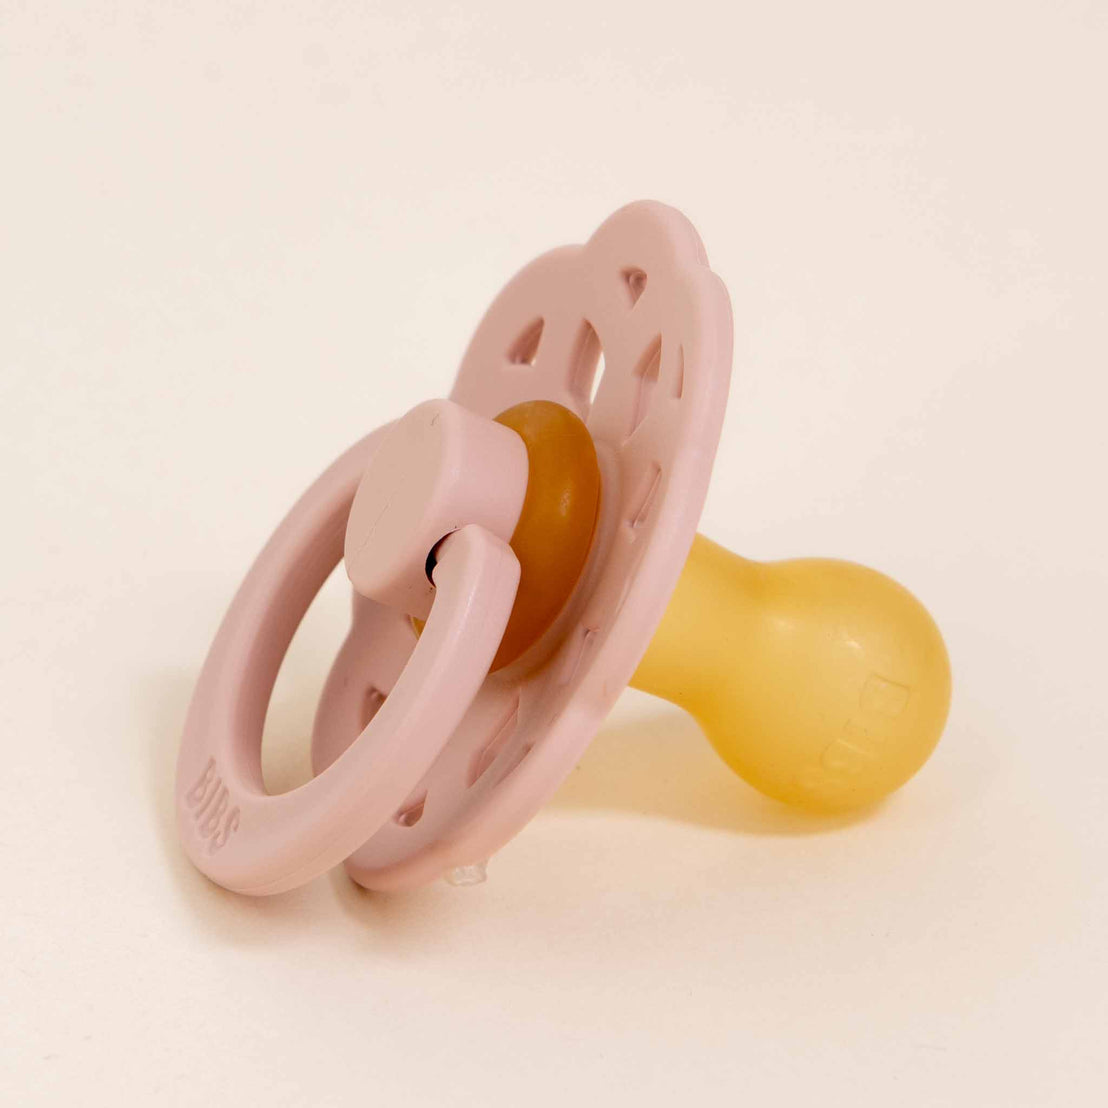 A pink and yellow Bibs Lace Pacifier in Blush against a plain, light background.